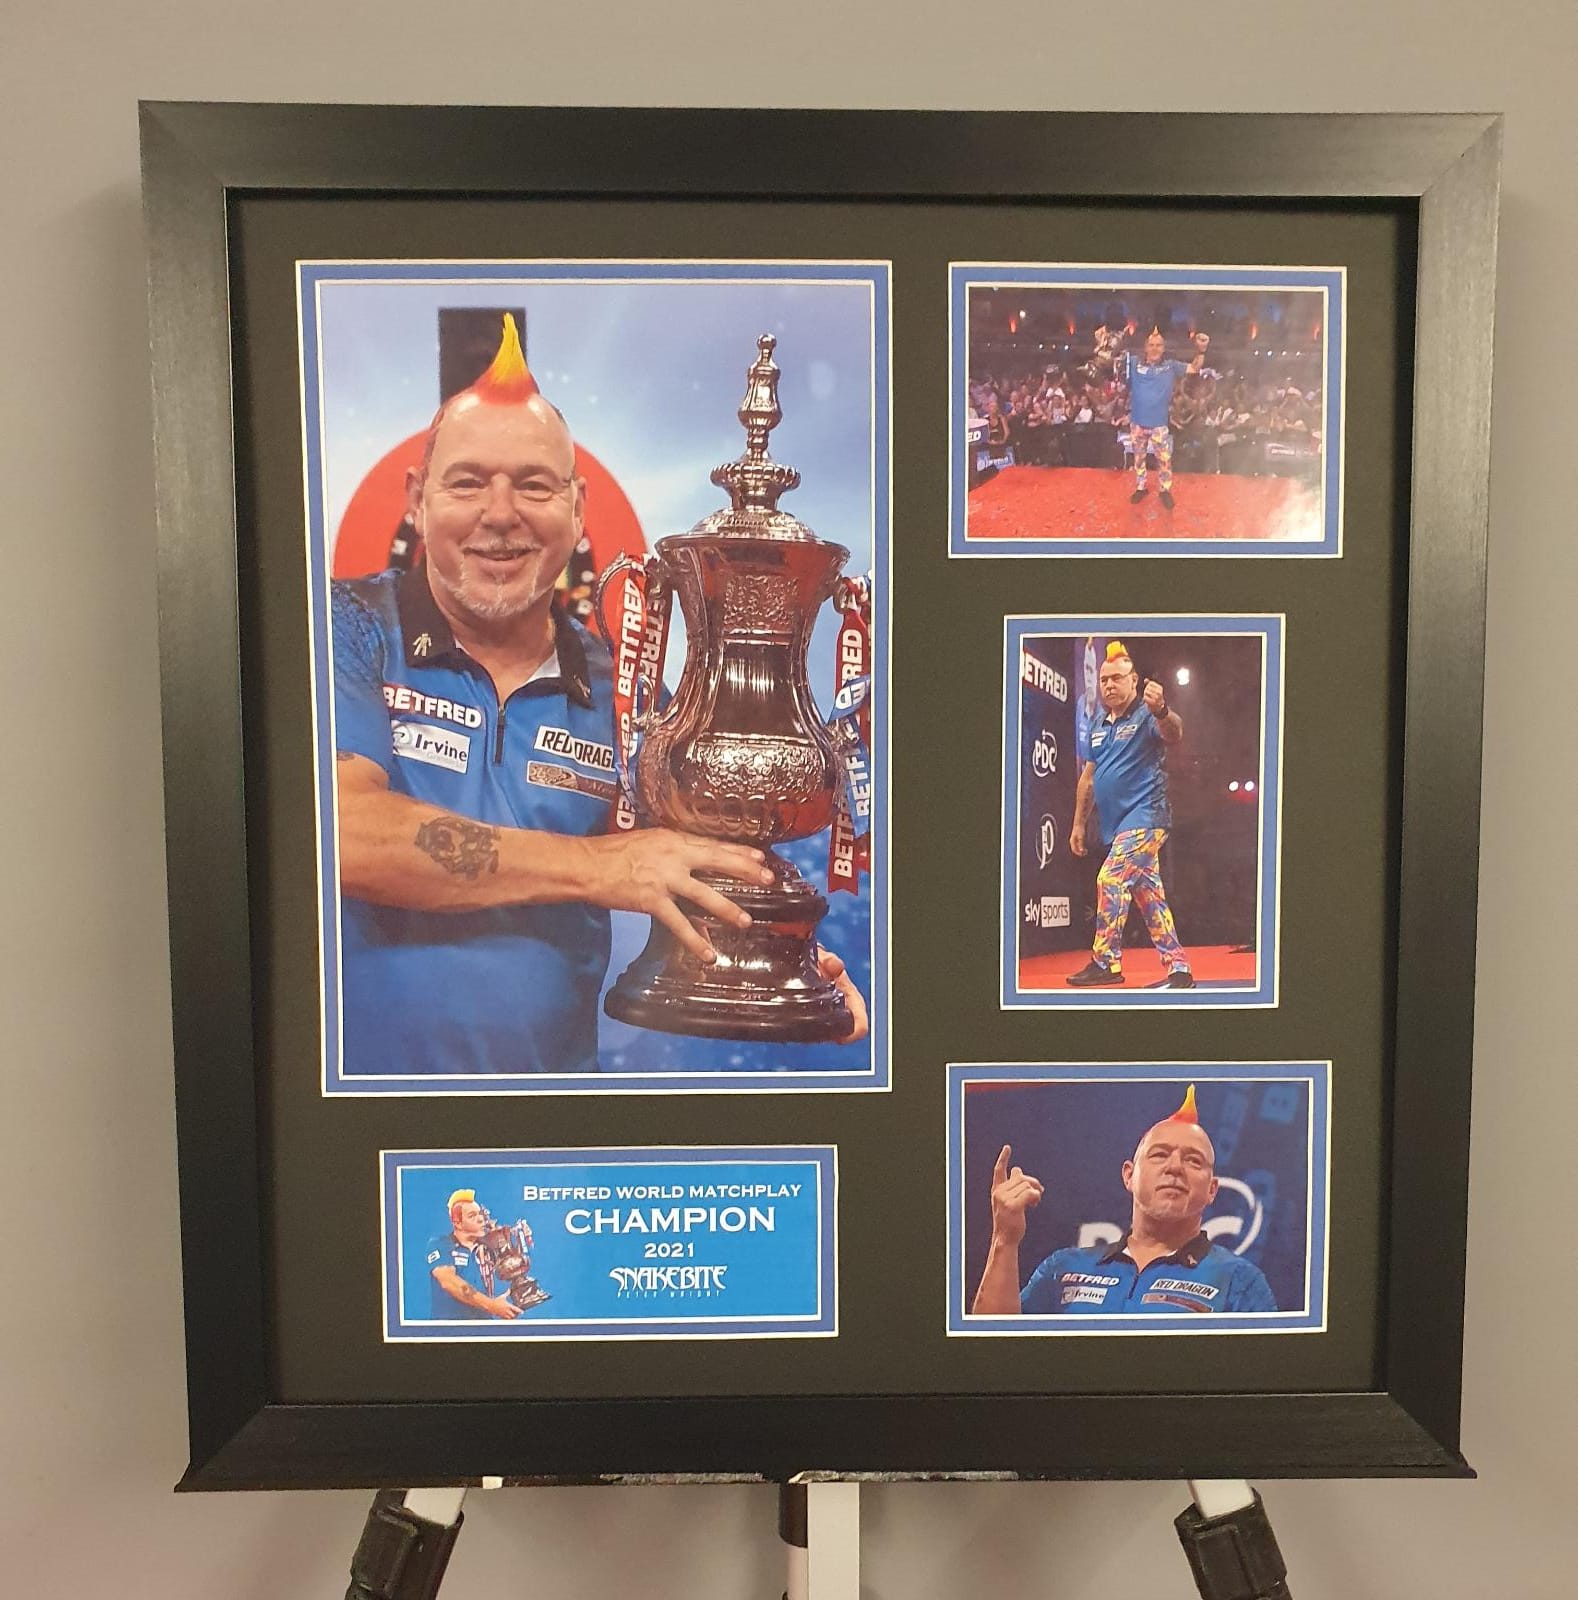 Limited edition one of 100 Winning World matchplay montage size 53cm x 53cm